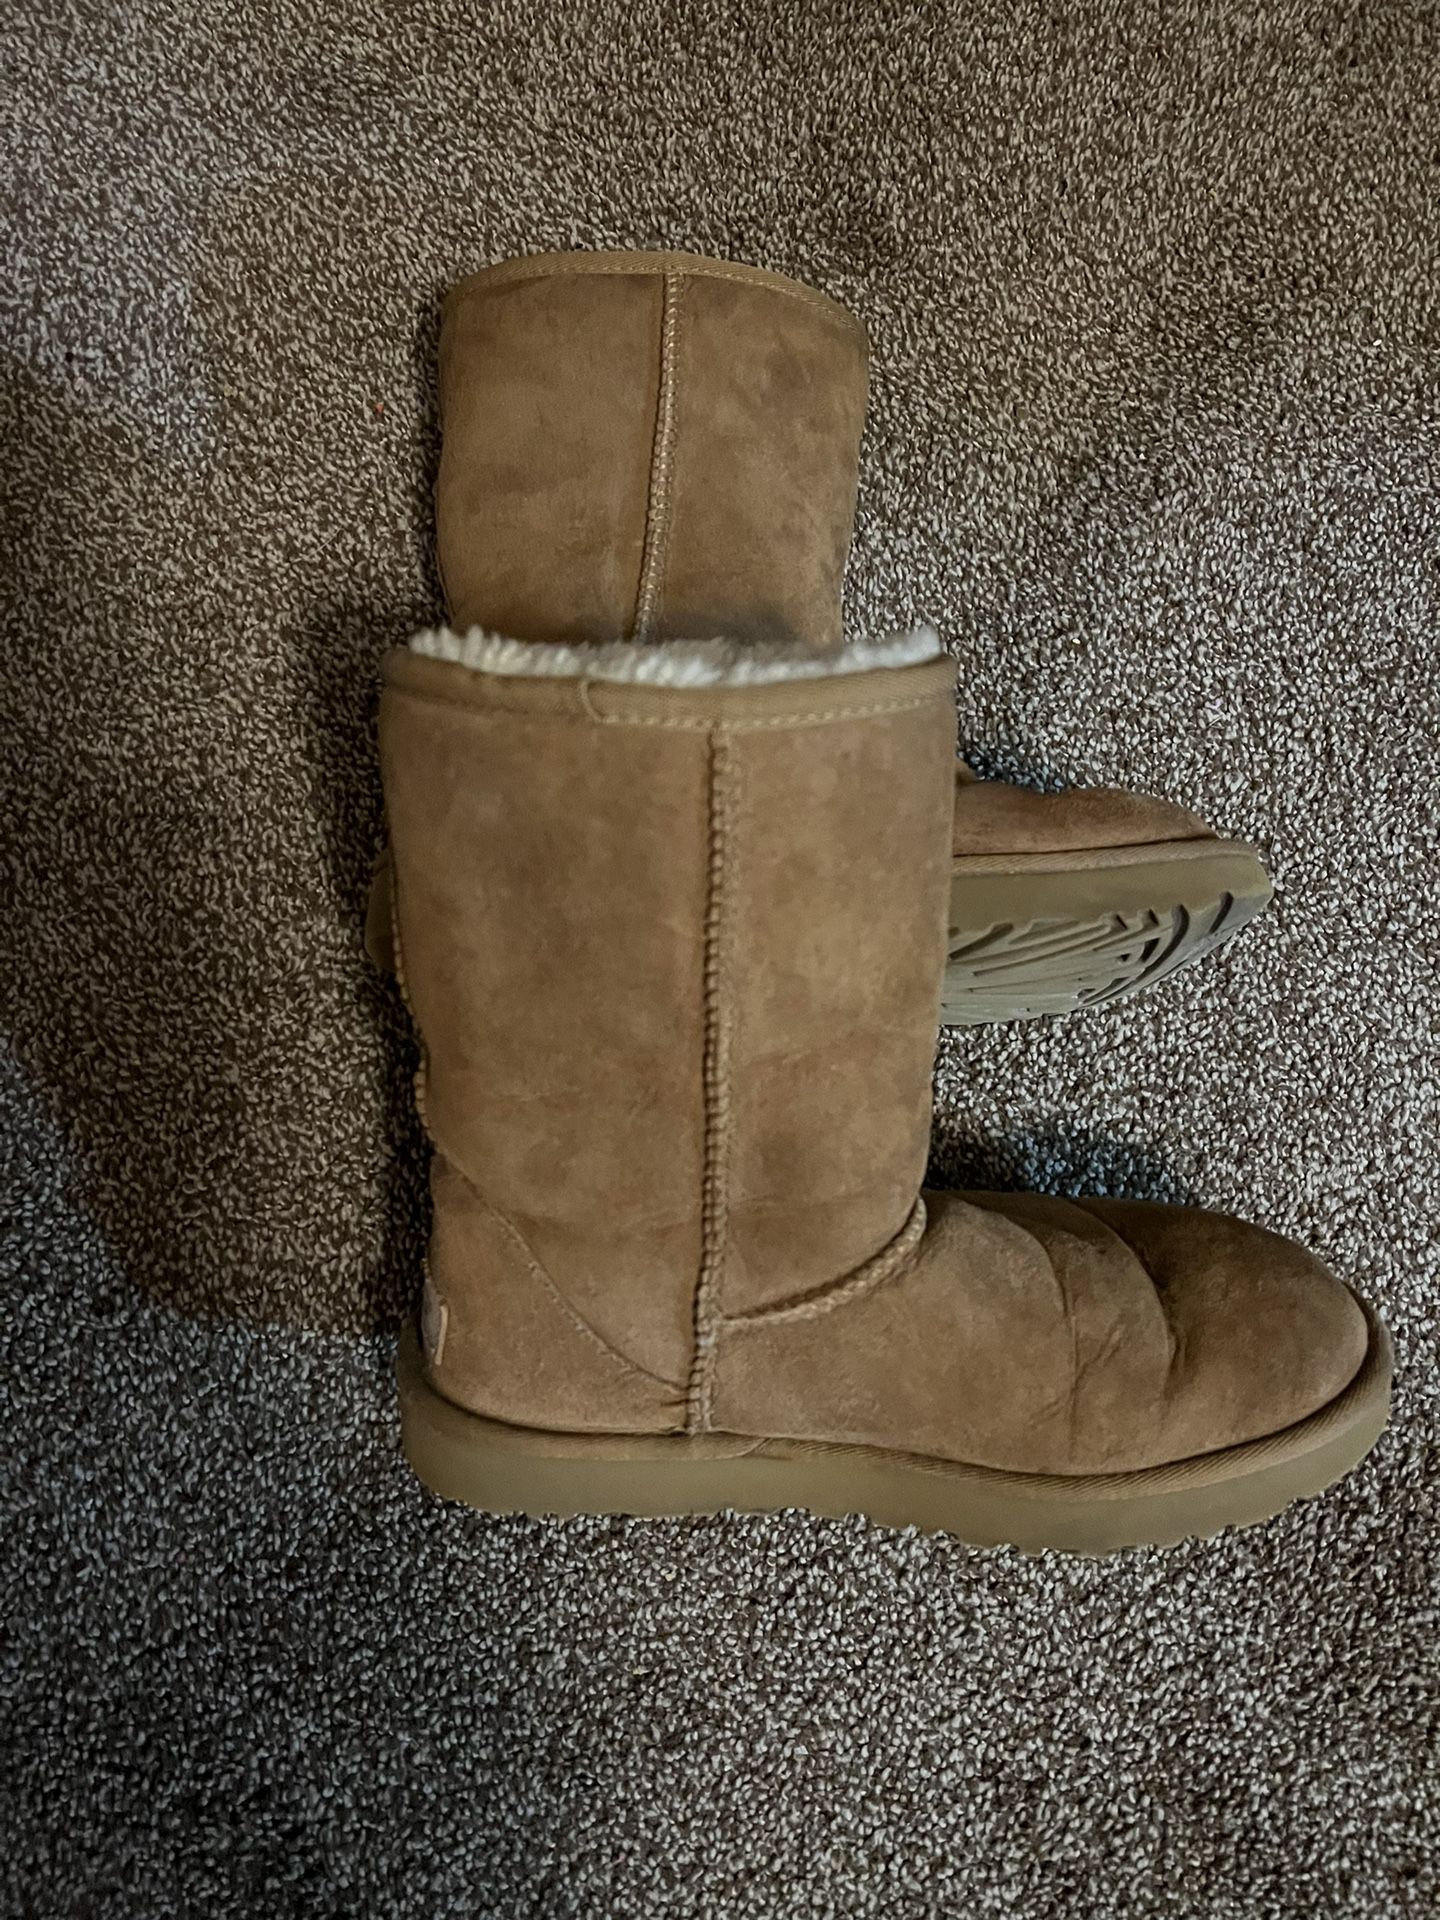 UGG BOOTS - Size 7